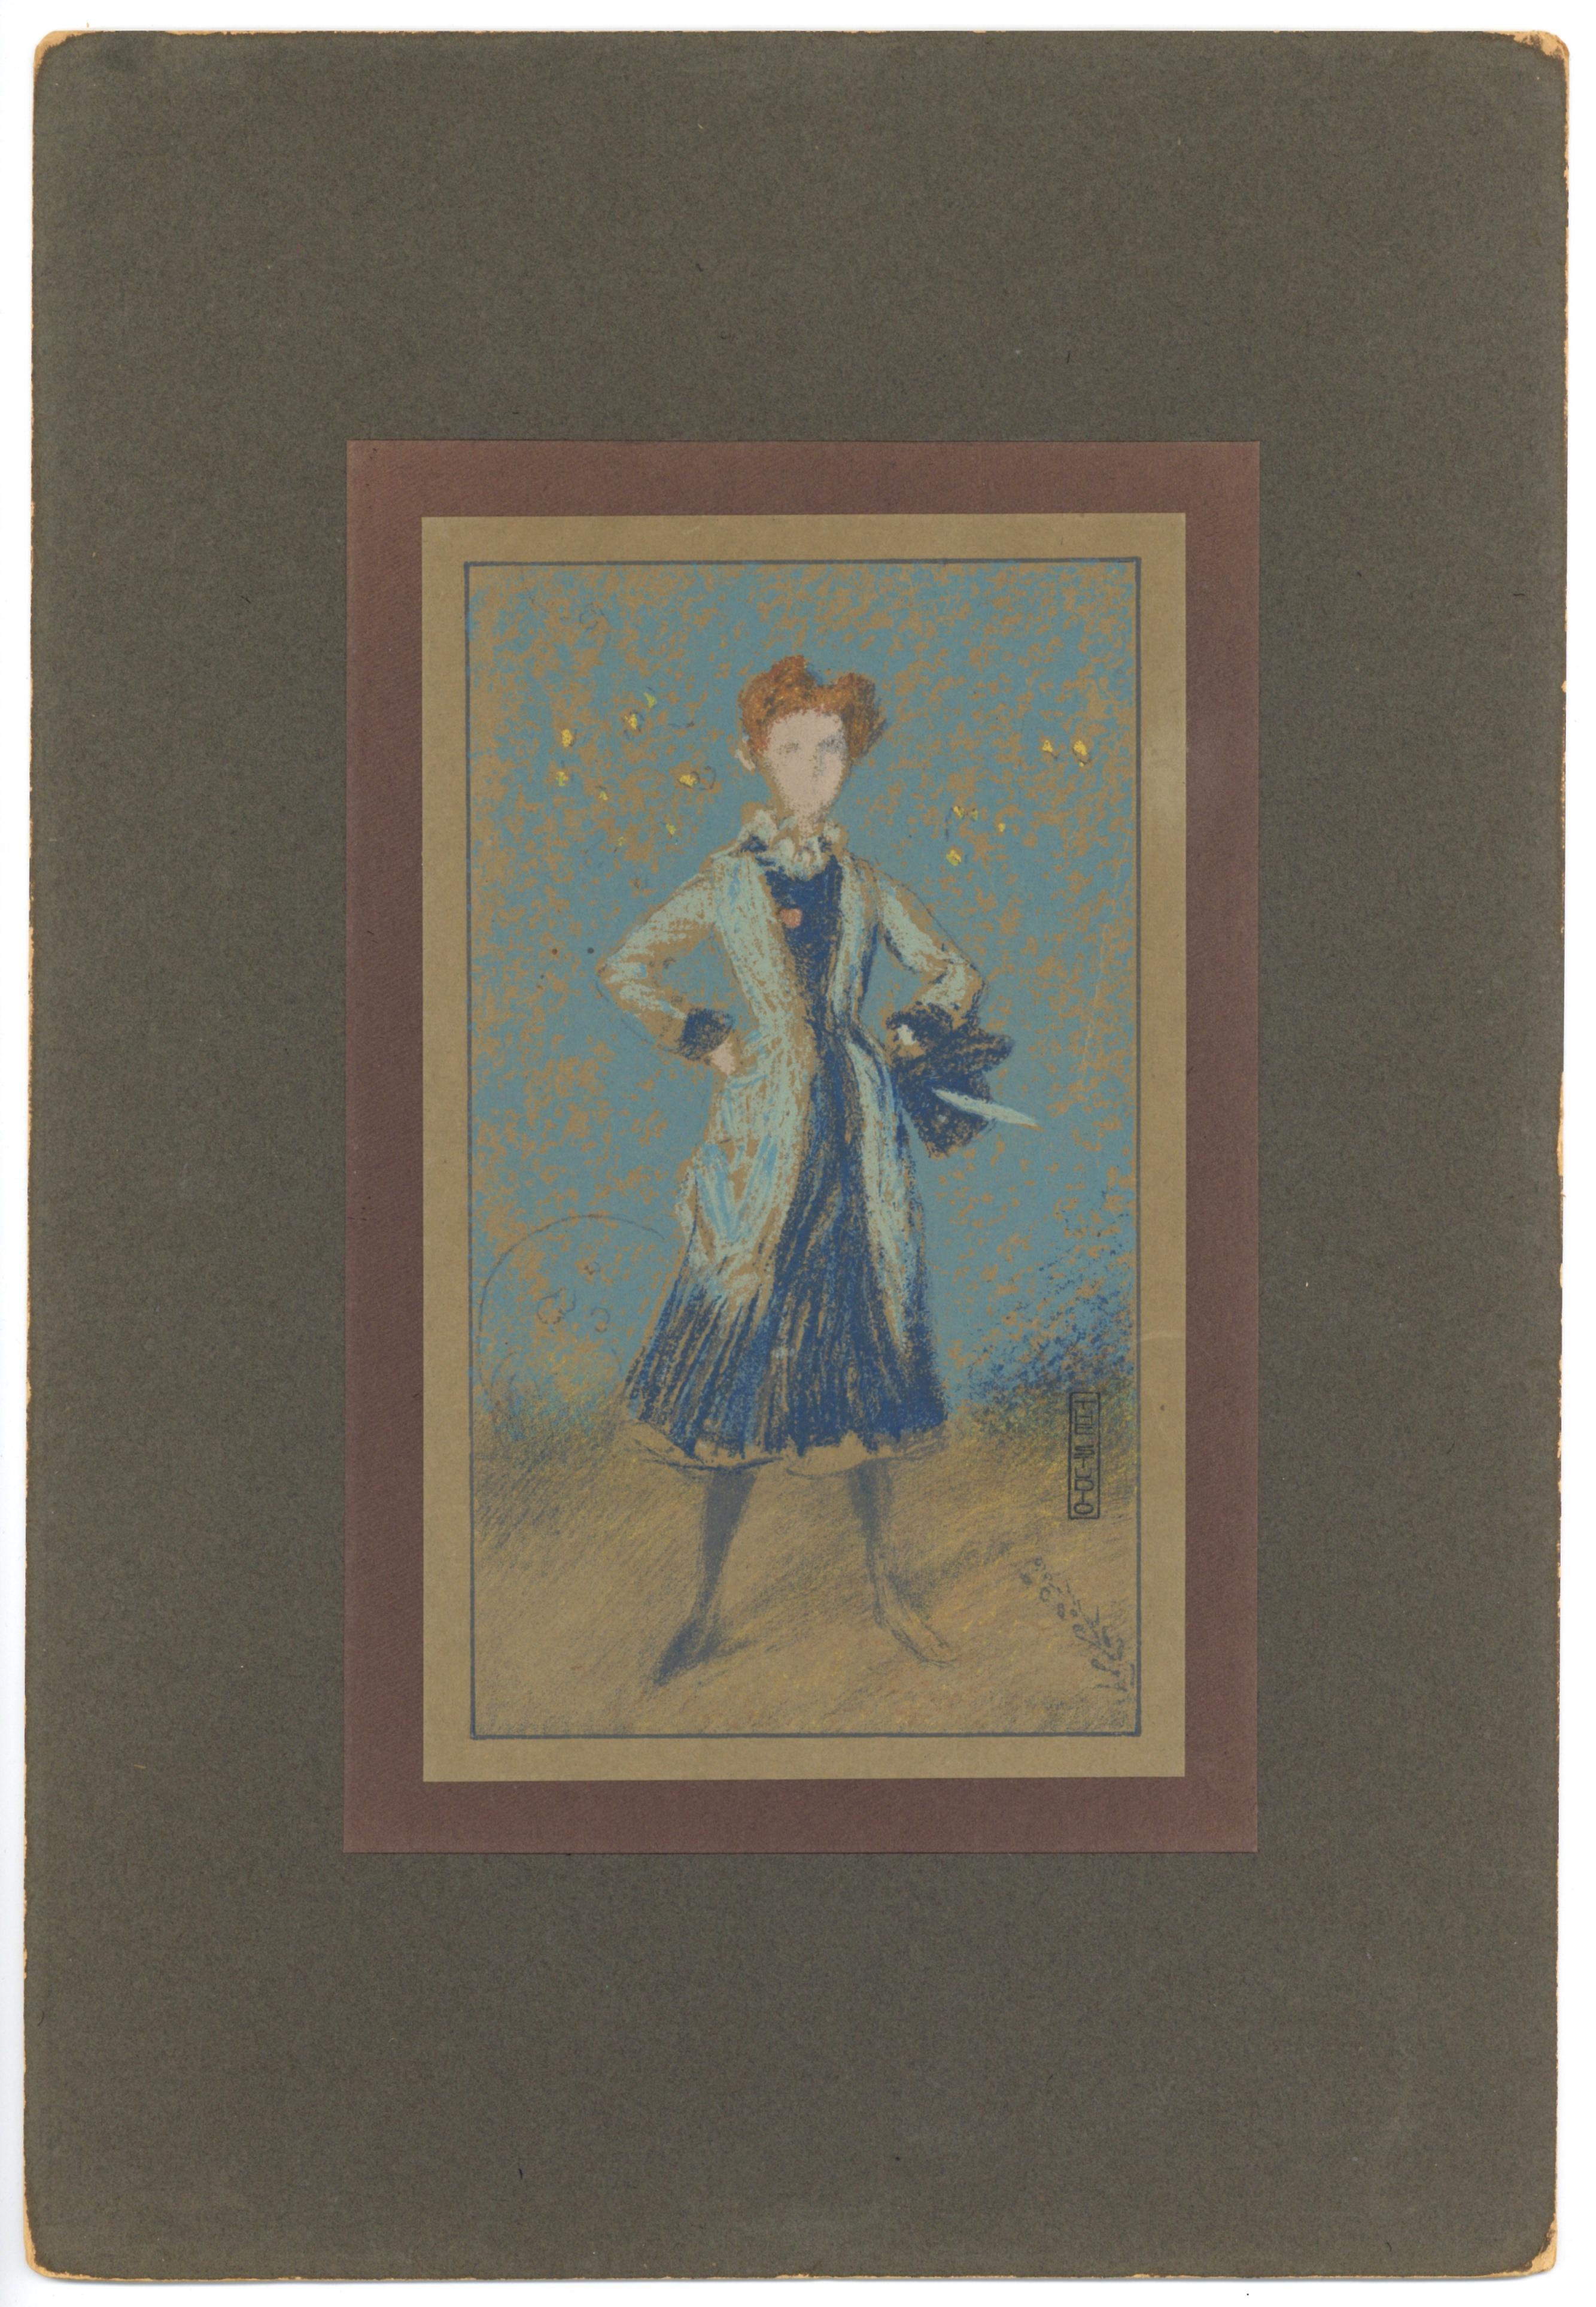 Medium: lithograph (after the pastel). The lithography was executed by Whistler's friend and fellow artist Thomas Way, and published in London by The Studio in 1905 for a rare deluxe portfolio. Printed on smooth wove paper, the lithograph measures 8